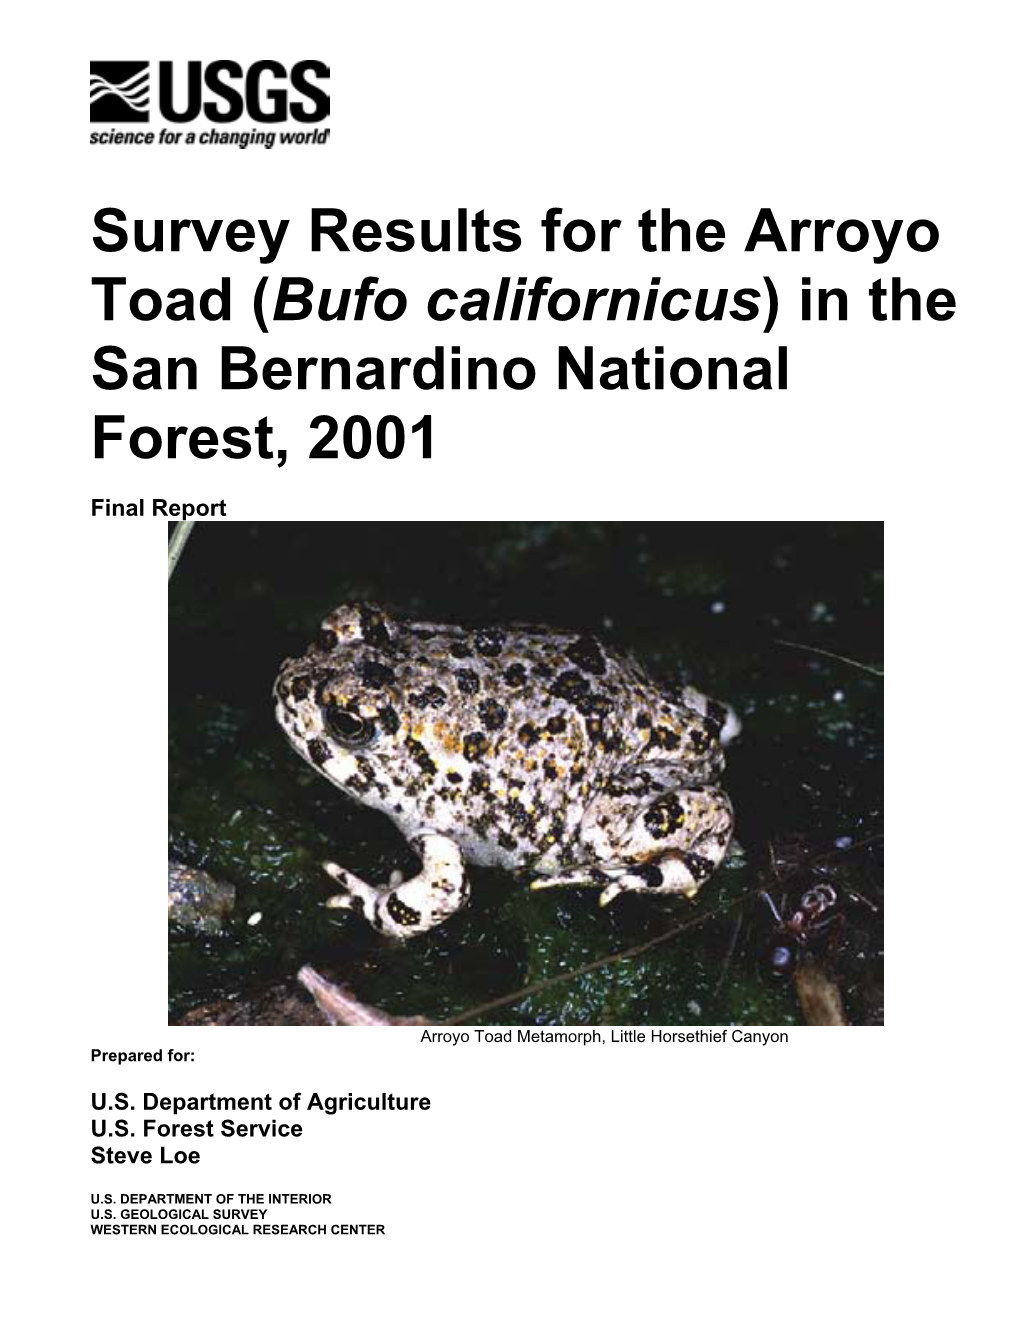 Survey Results for the Arroyo Toad (Bufo Californicus) in the San Bernardino National Forest, 2001